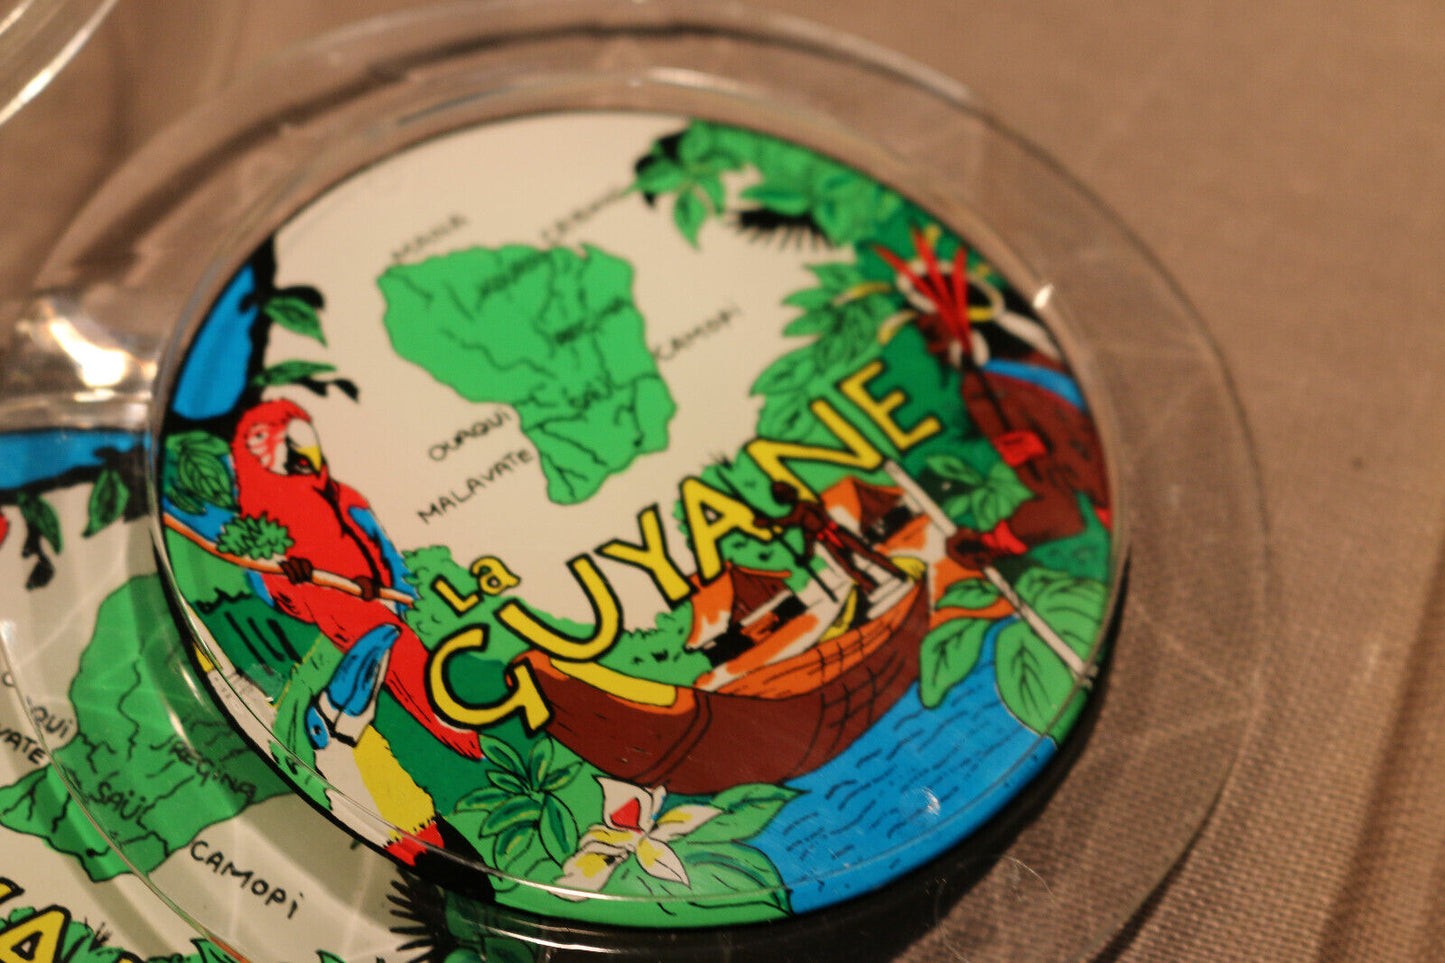 La Guyane Country Island Map Boat Parrot Set Of 5 Drink Coasters Rare In Box